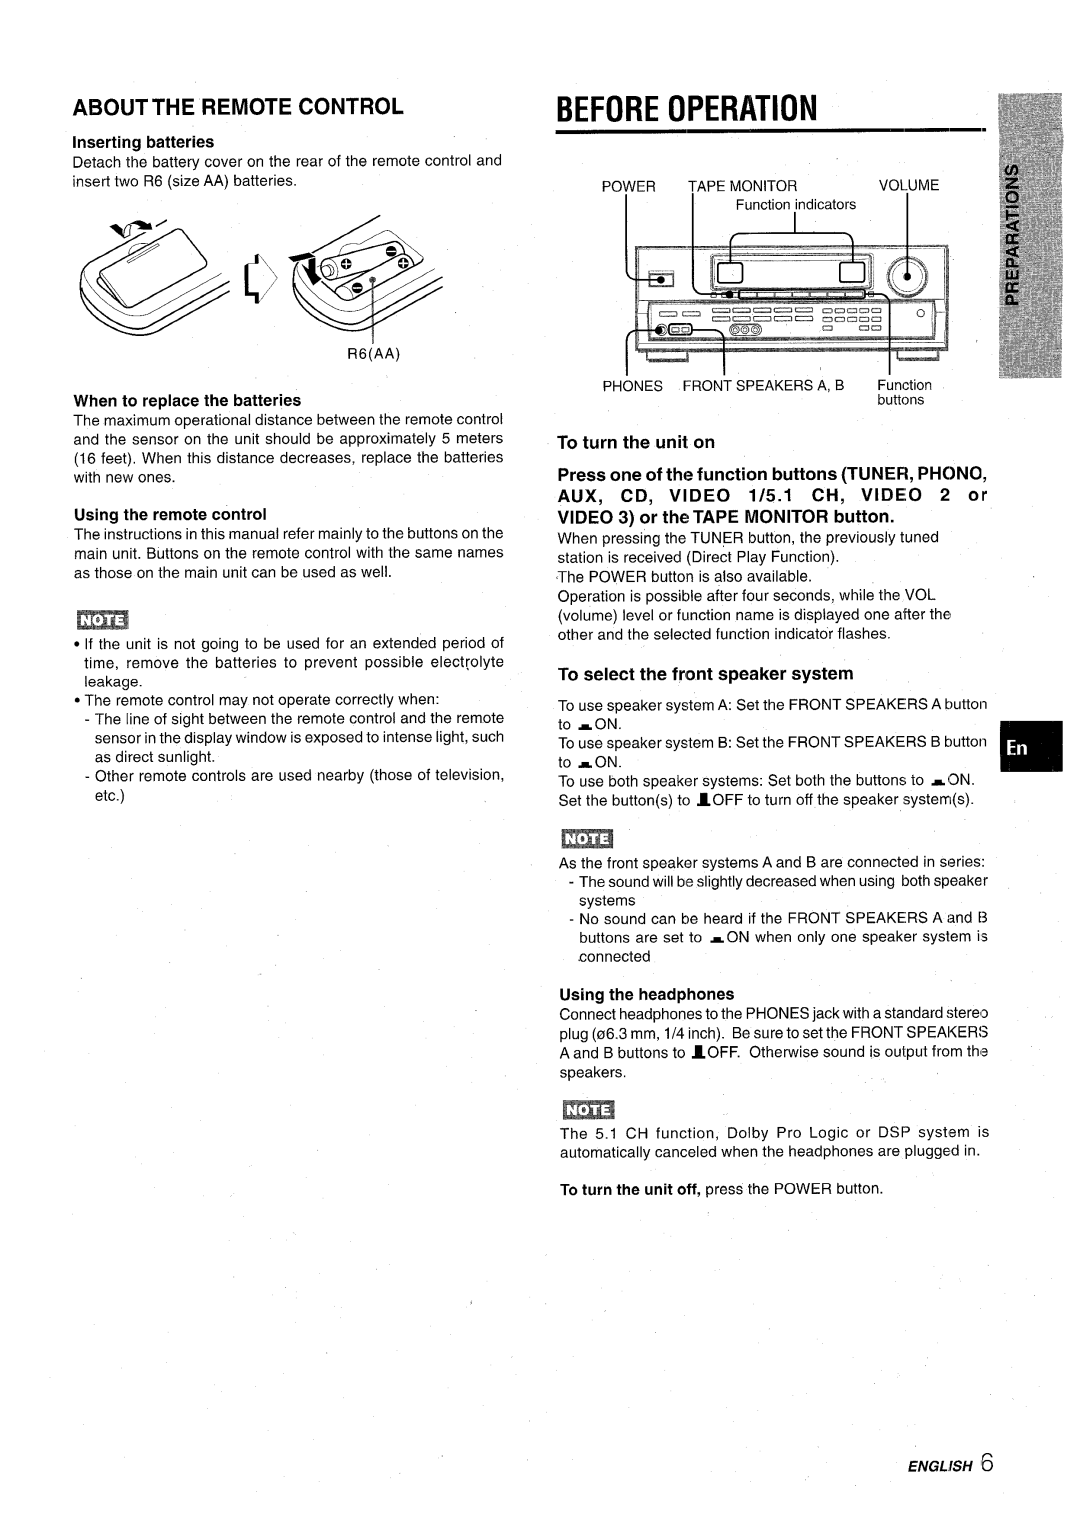 Aiwa AV-D30 manual Operation, Abouttheremote Control, ENGLISH16, Press one of the function buttons TUNEFI, PHCINO, Before 